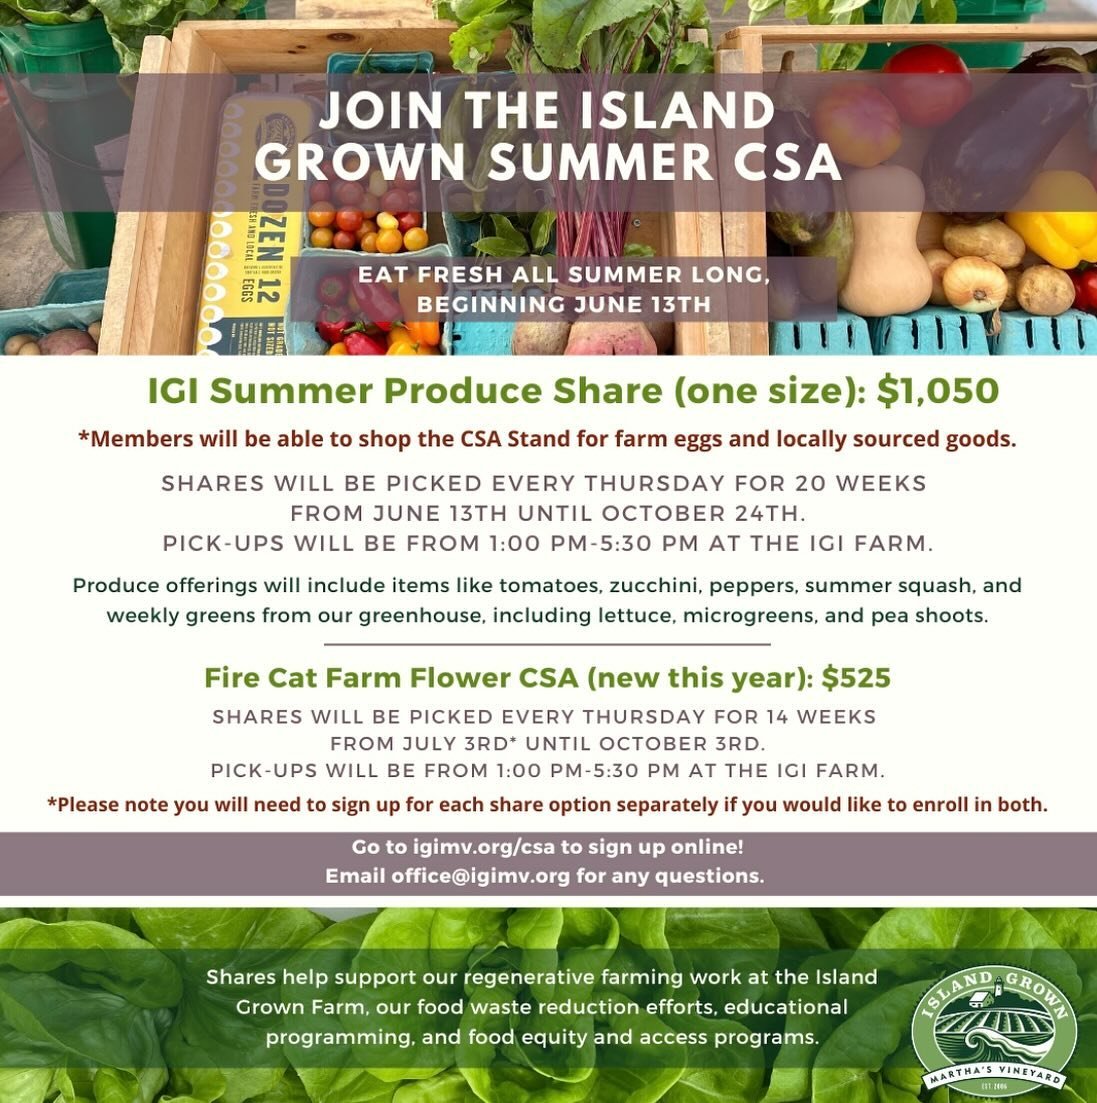 Exciting news! Our Summer CSA registration is now OPEN! Secure your spot today for a season filled with fresh, locally grown produce straight from our farm to your table. Don&rsquo;t miss out on the opportunity to support local agriculture and enjoy 